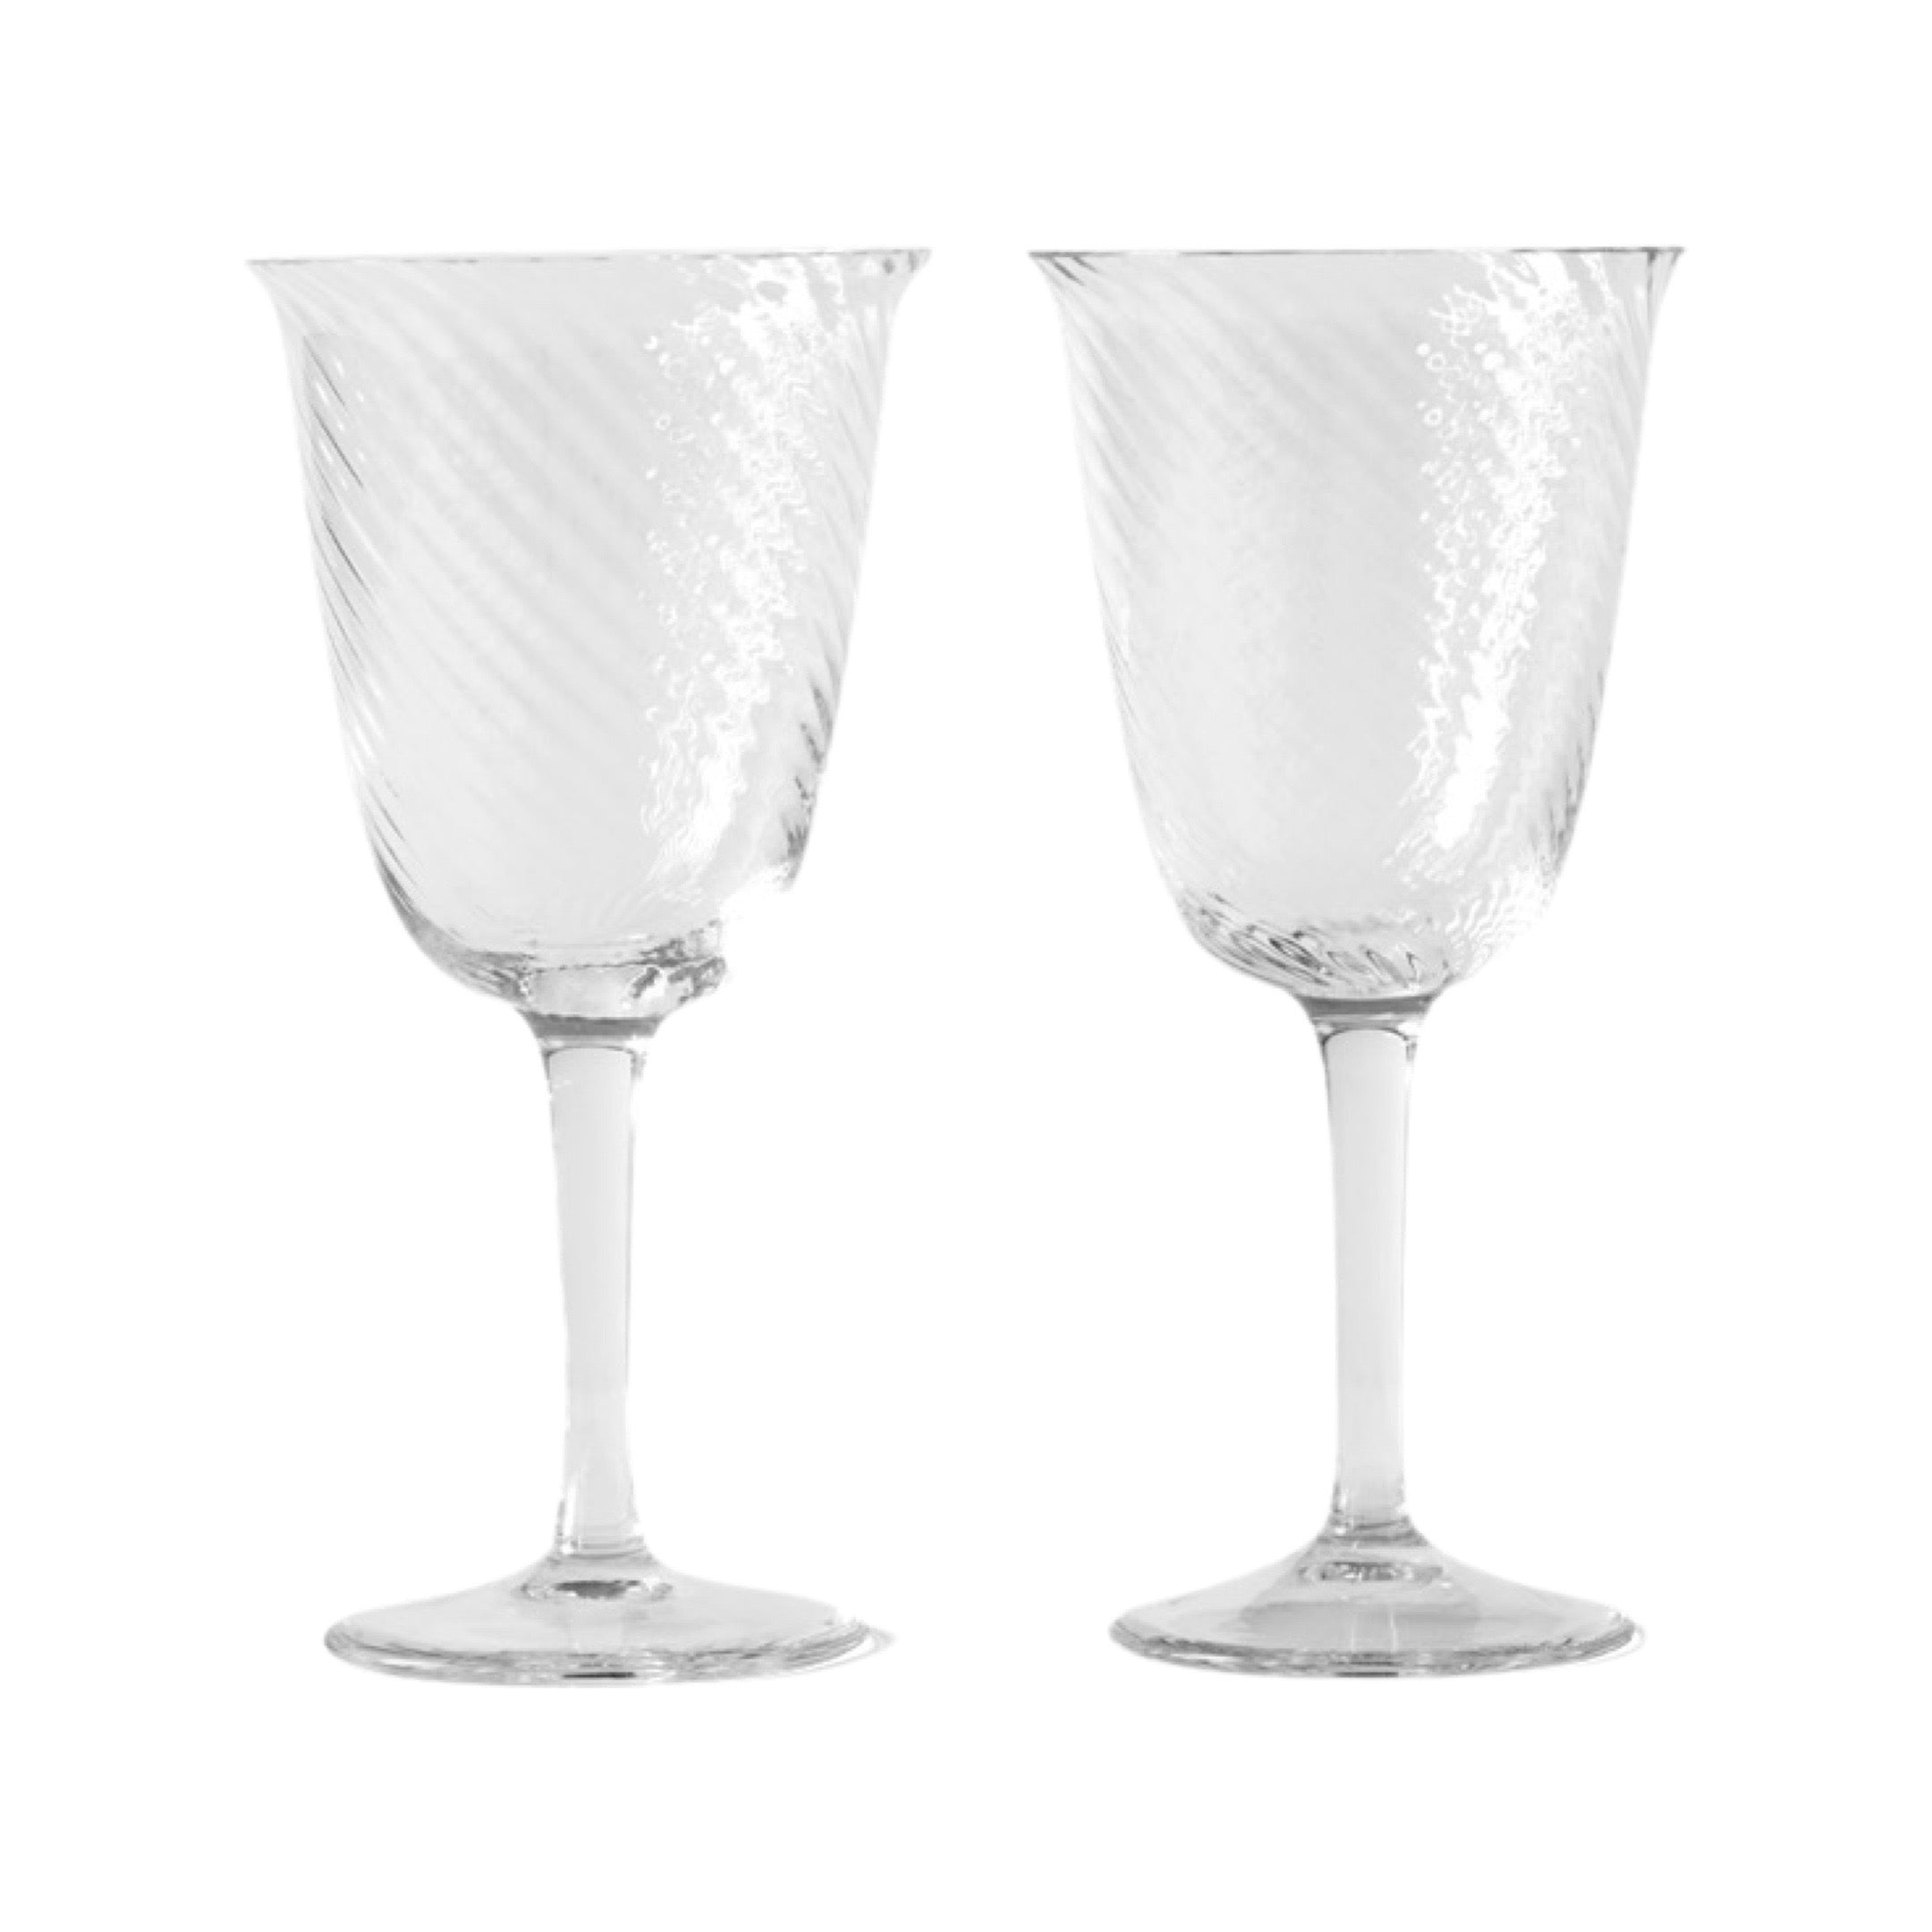 &Tradition SC80 Collect Wine Glass (Set of 2) - High